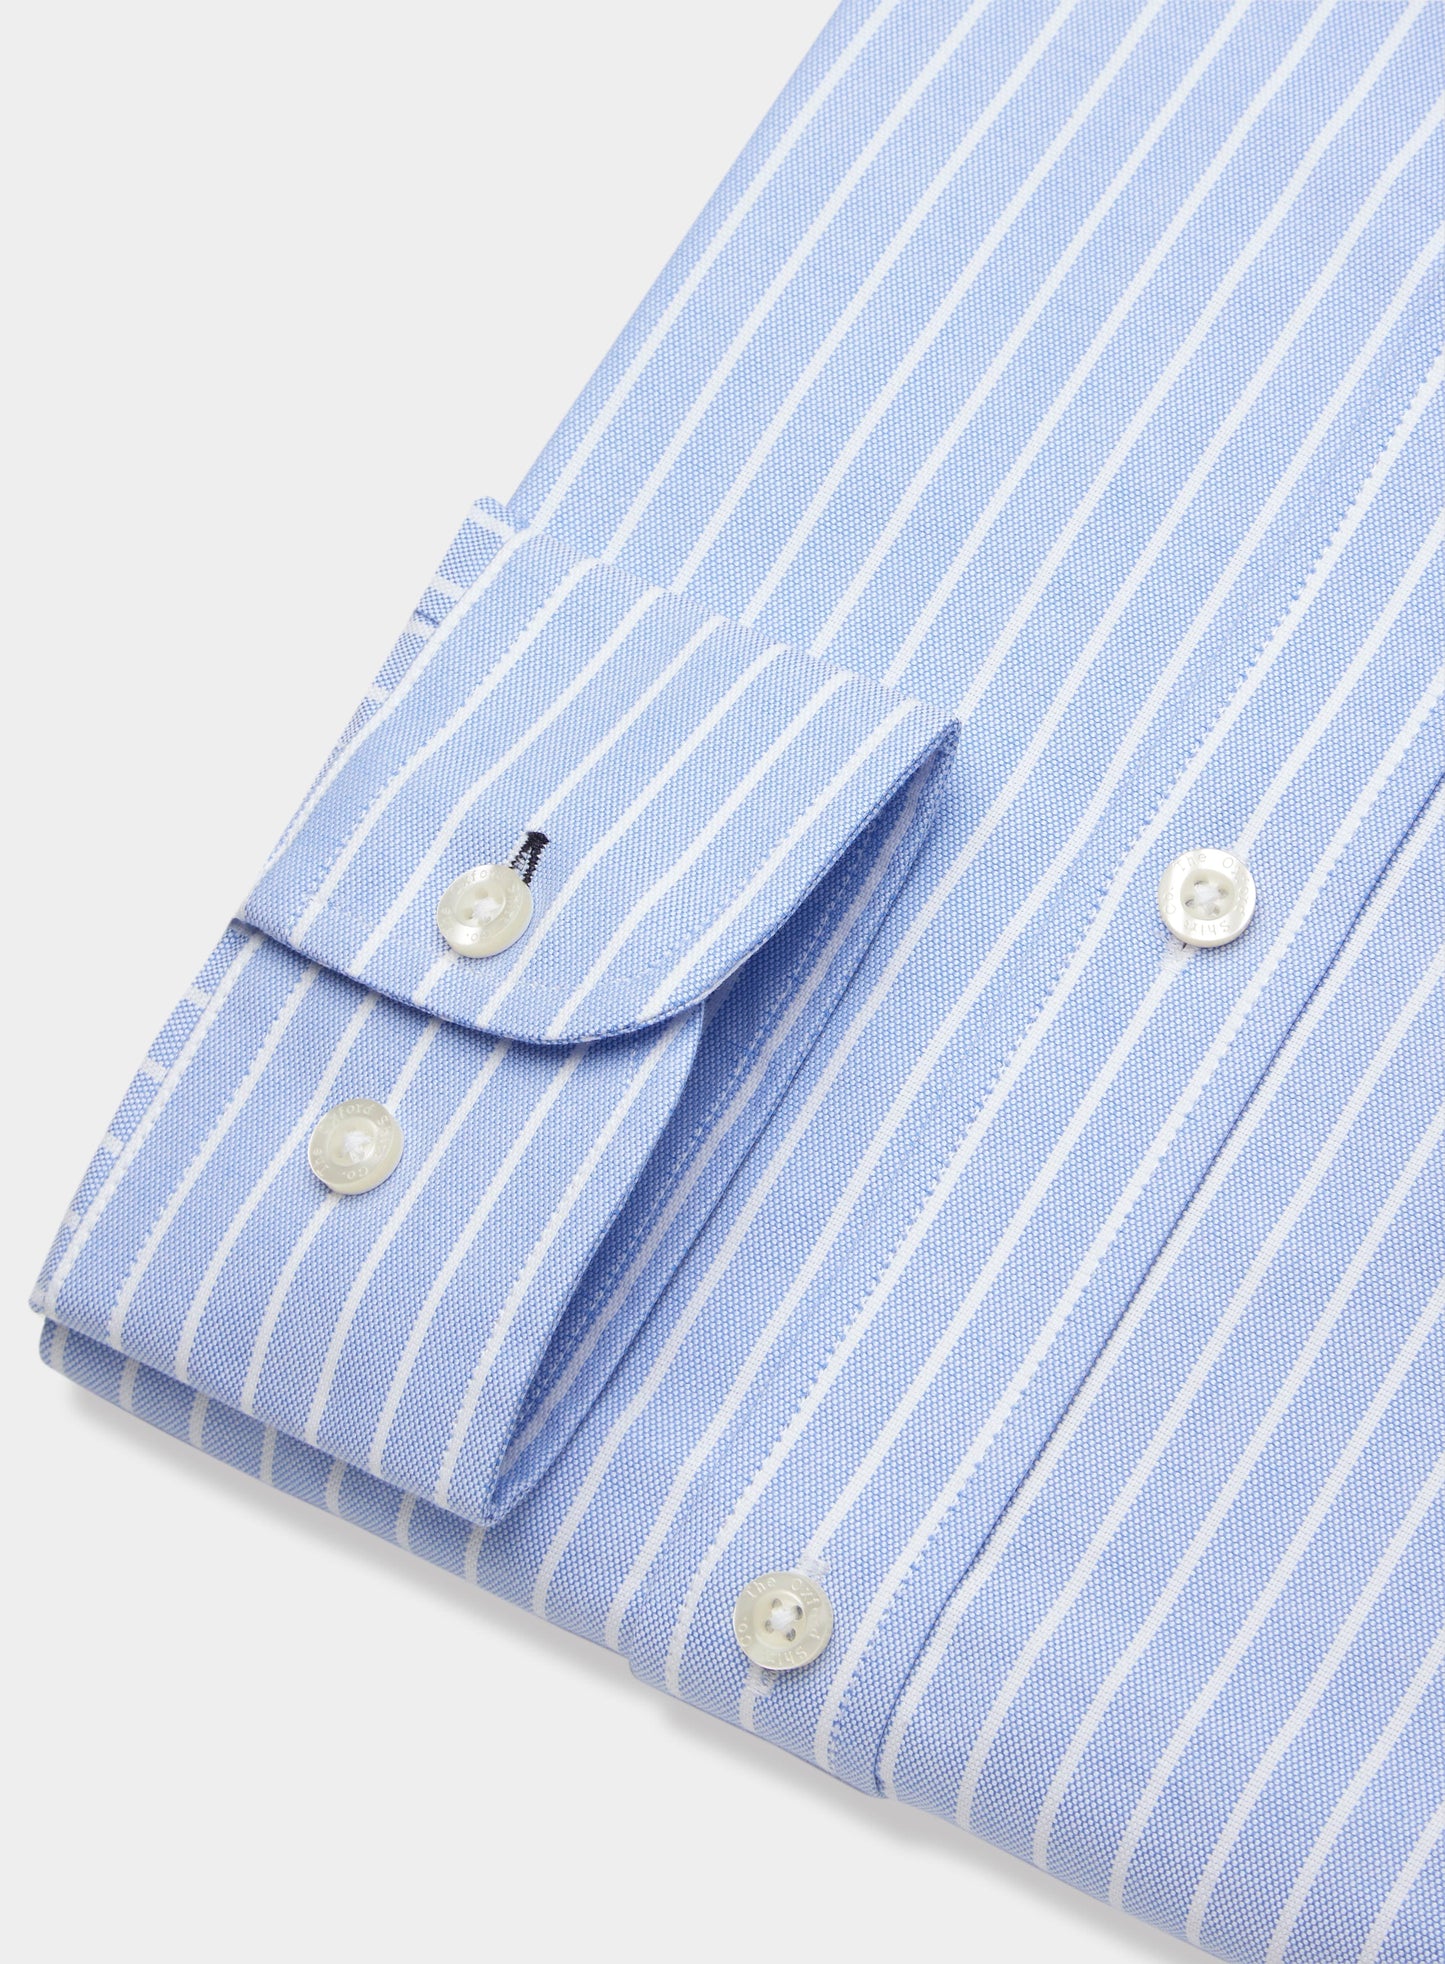 Button Down Shirt in Blue and White Stripe